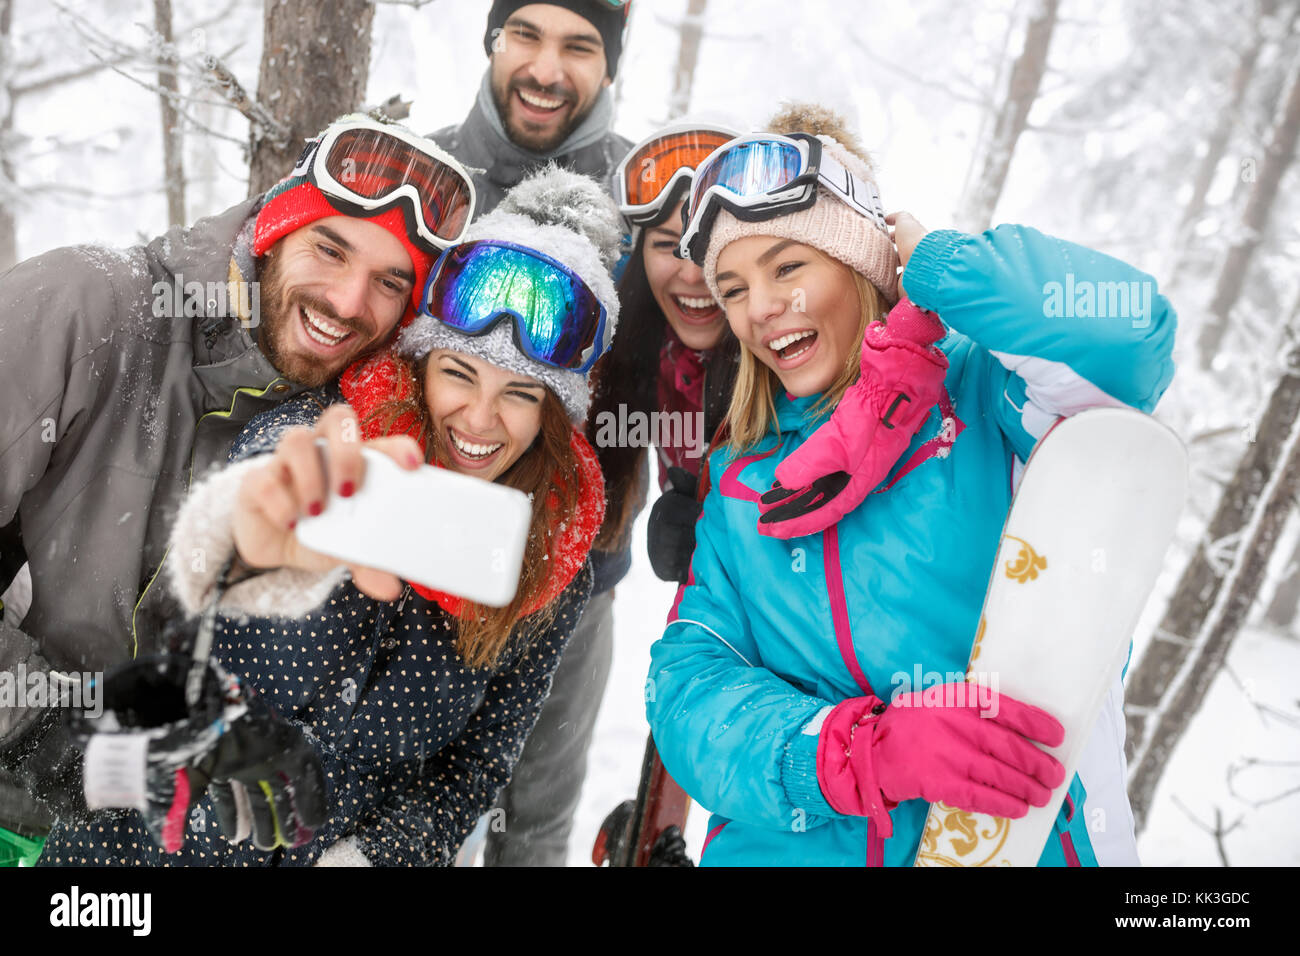 Smiling male with female skiers with ski equipment Stock Photo